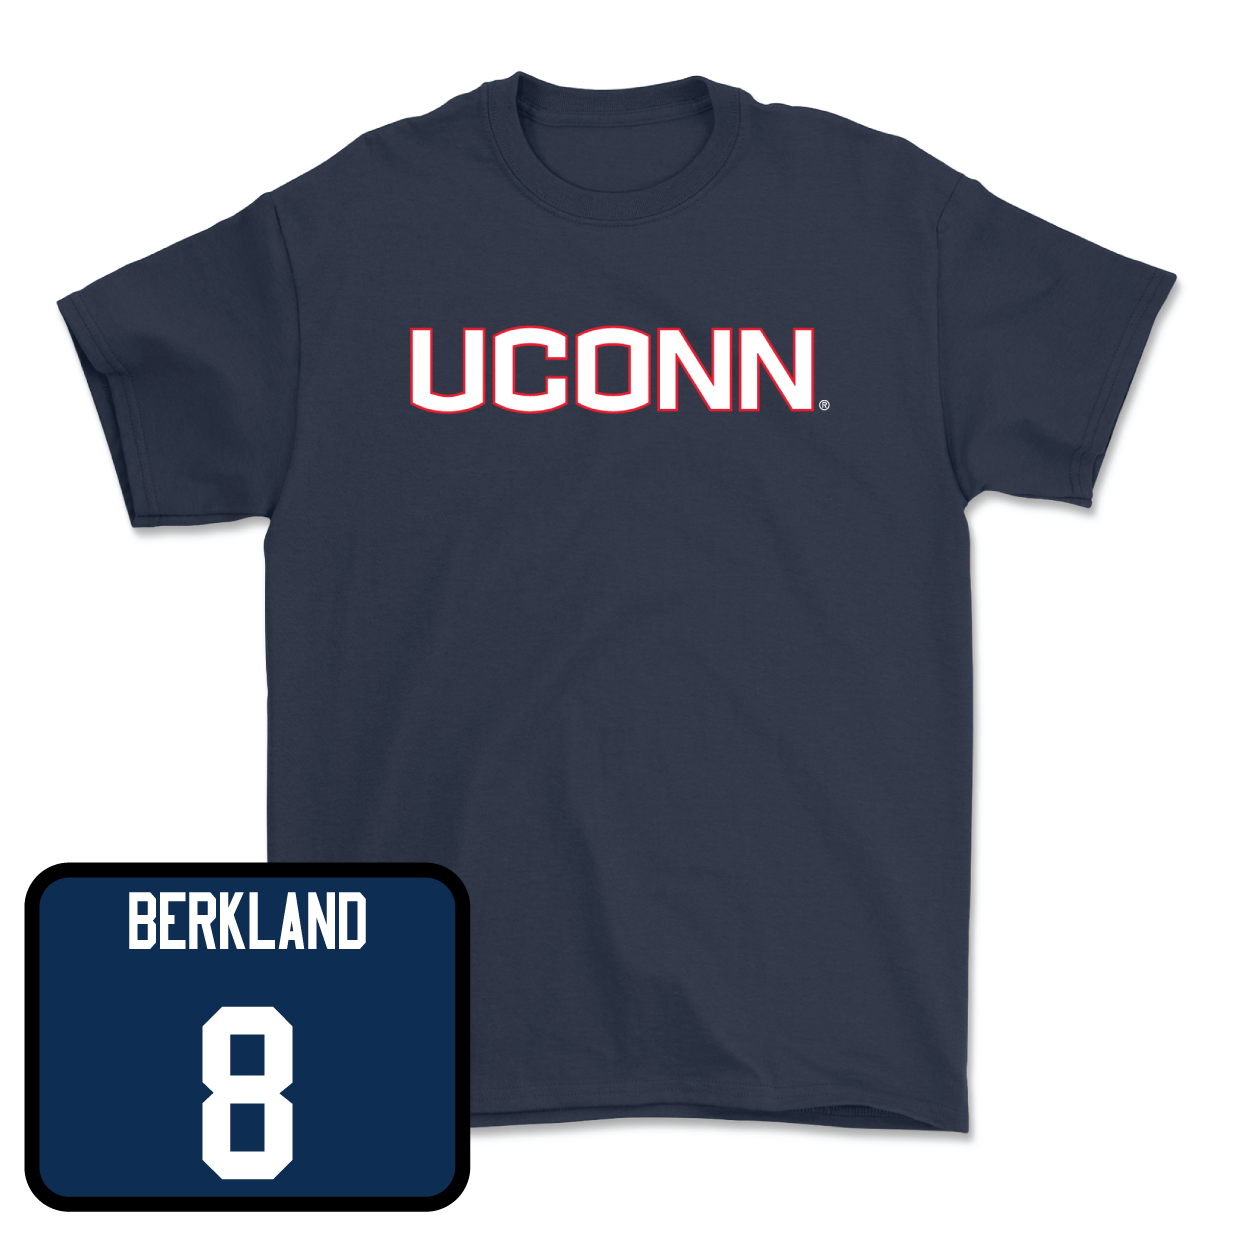 Navy Women's Volleyball UConn Tee Youth Large / Karly Berkland | #8